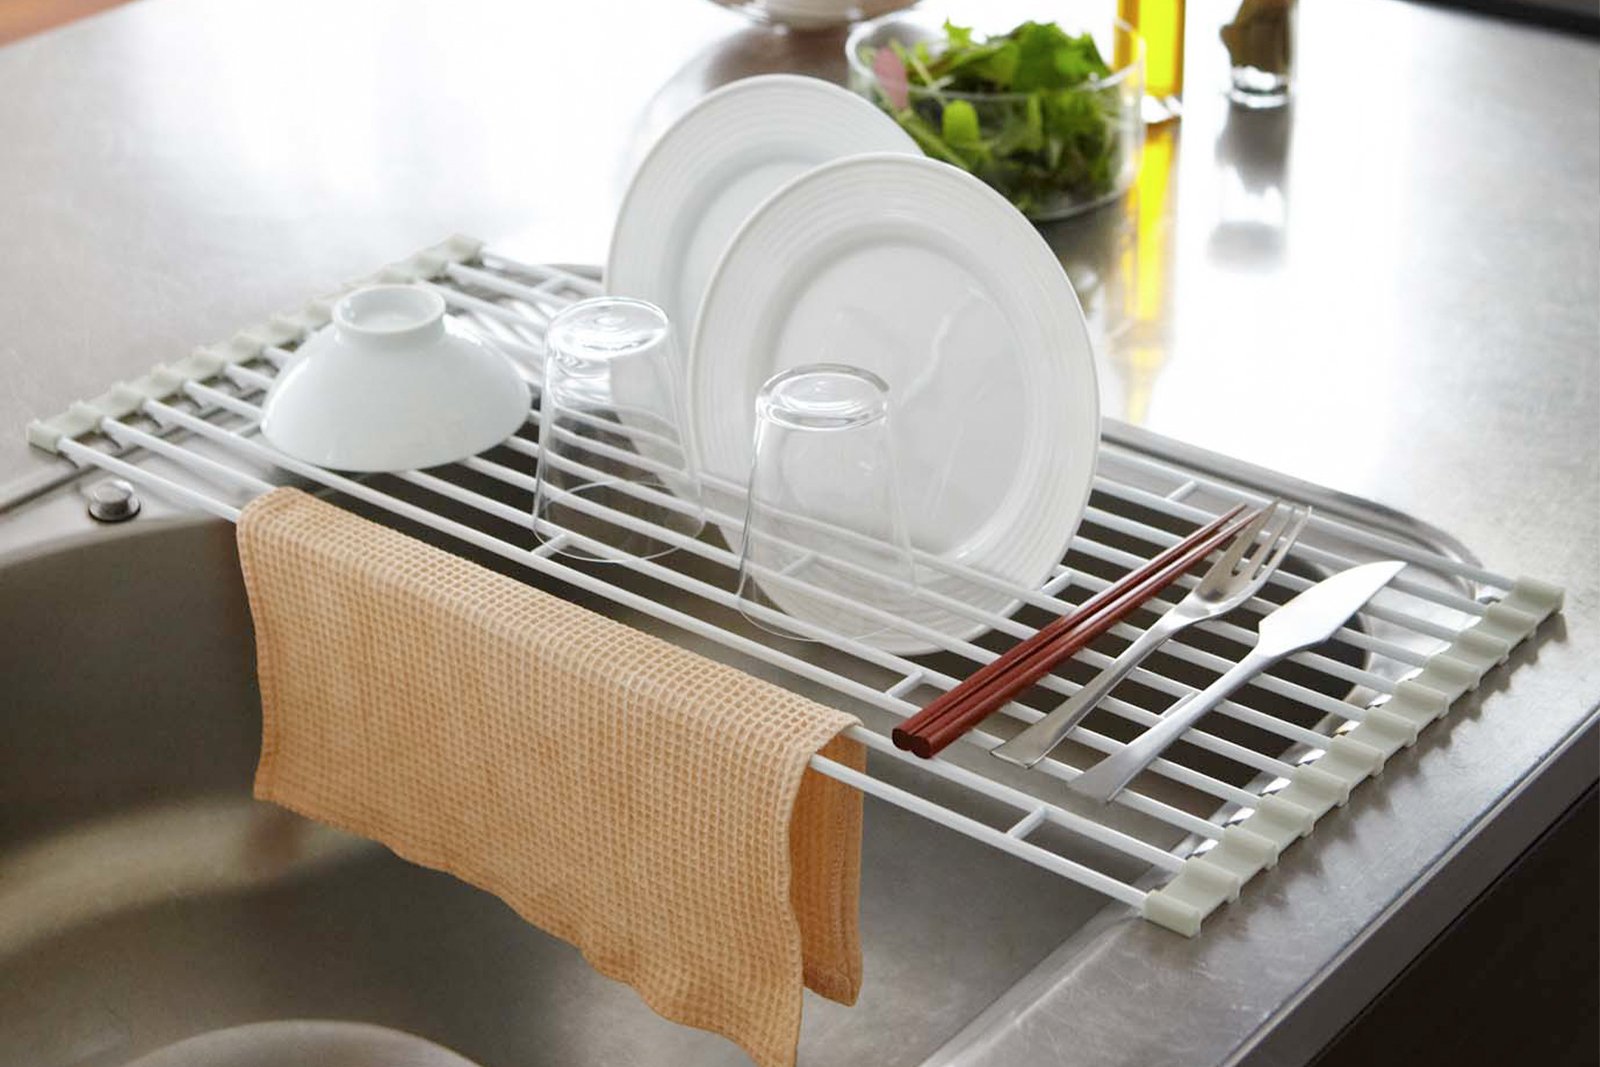 Over-the-Sink Dish Drainer holding plates, cups, bowls, silverware on sink counter by Yamazaki Home.